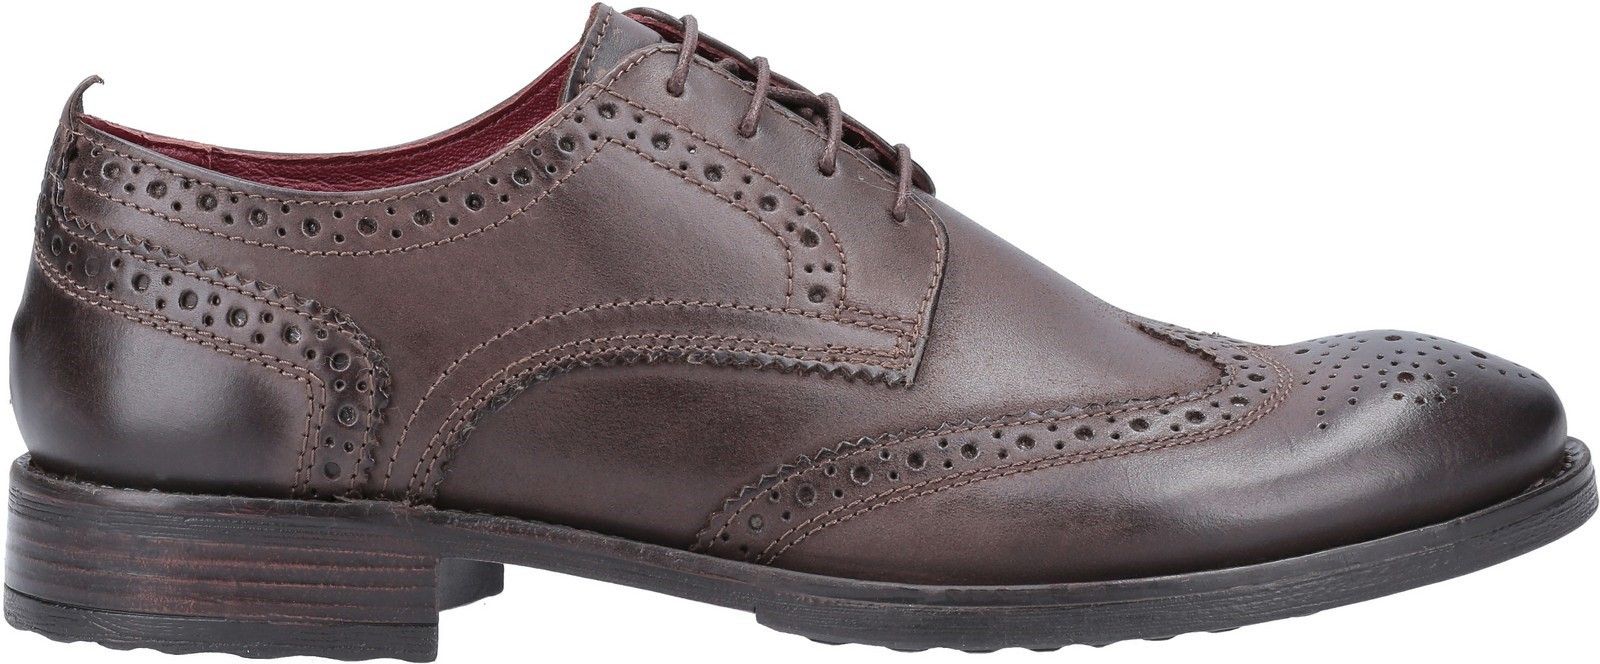 This Italian inspired Tipple Collection features the stylish Porter burnished brogue. In this 4-lace structure, you'll be turning heads on your commute.The intricate brogue detailed uppers oozes style while the textured sole offers a confident step. Brogue Shoe. 
Rubber Sole.